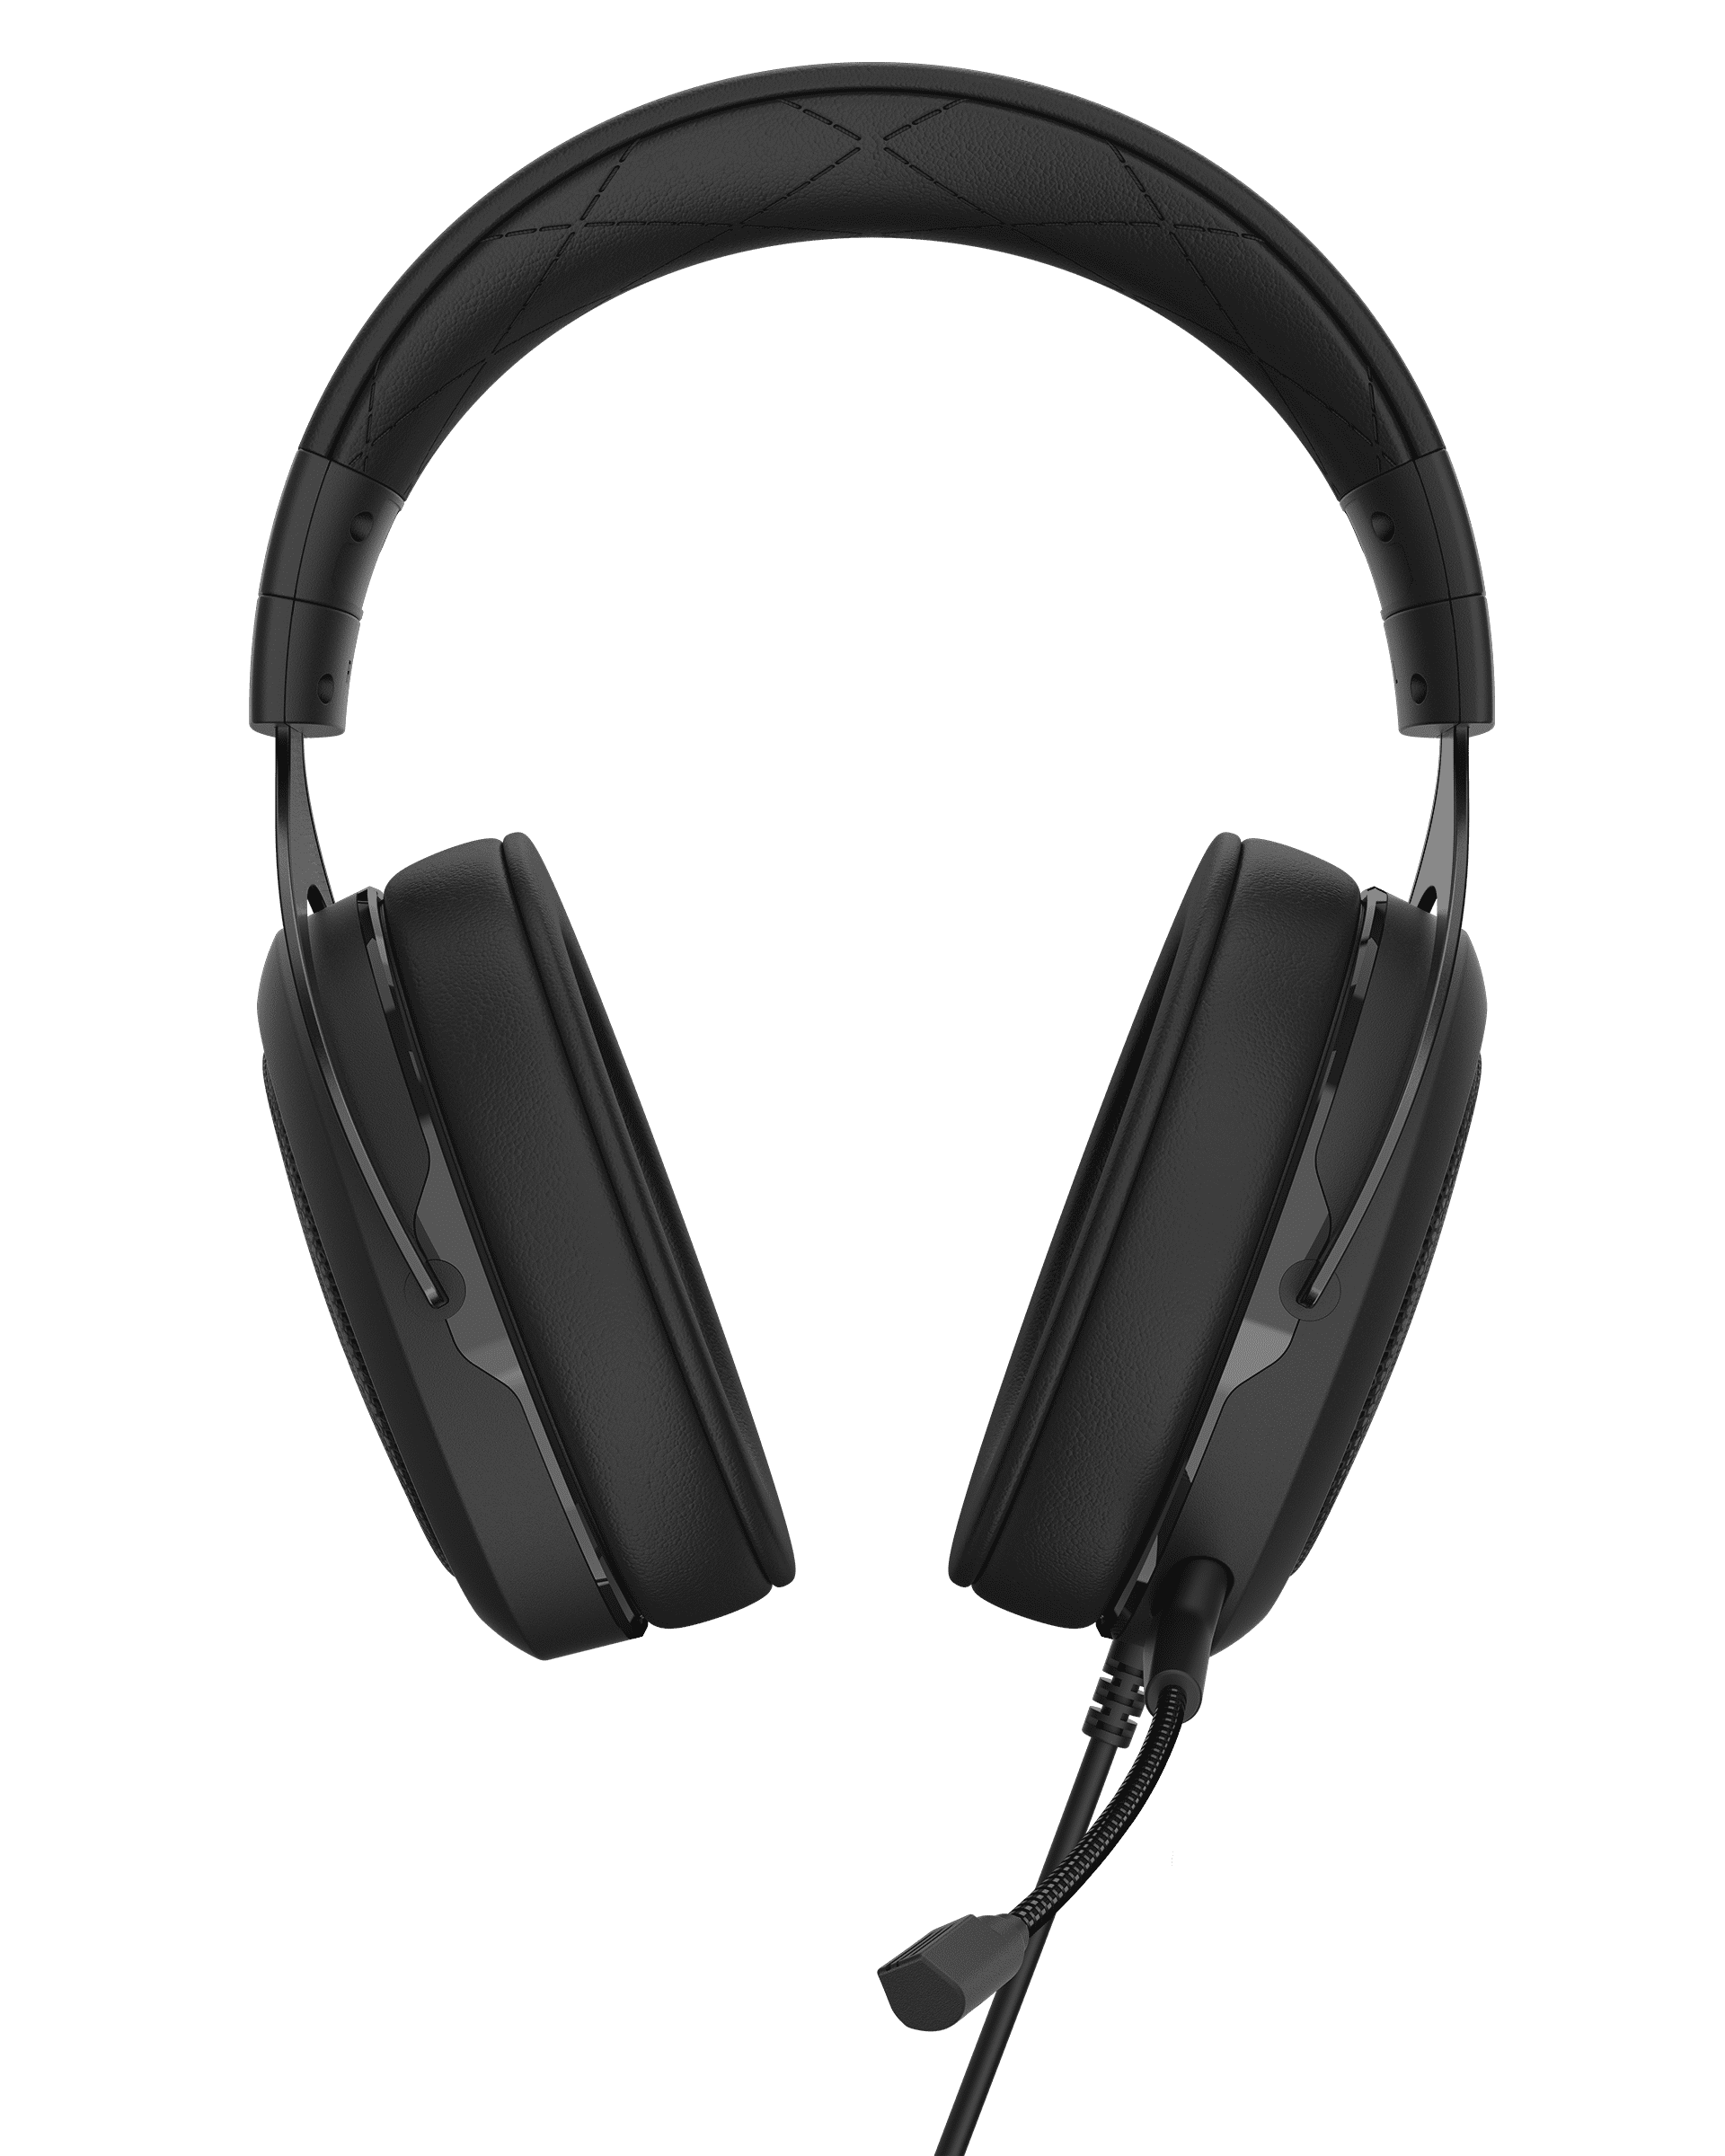 Corsair HS50 Pro Stereo Gaming Headset - Discord Certified Headphones - Works with PC, Mac, Xbox Series X, Xbox Series S, Xbox One, PS5, PS4, Nintendo Switch, iOS and Android Carbon Walmart.com